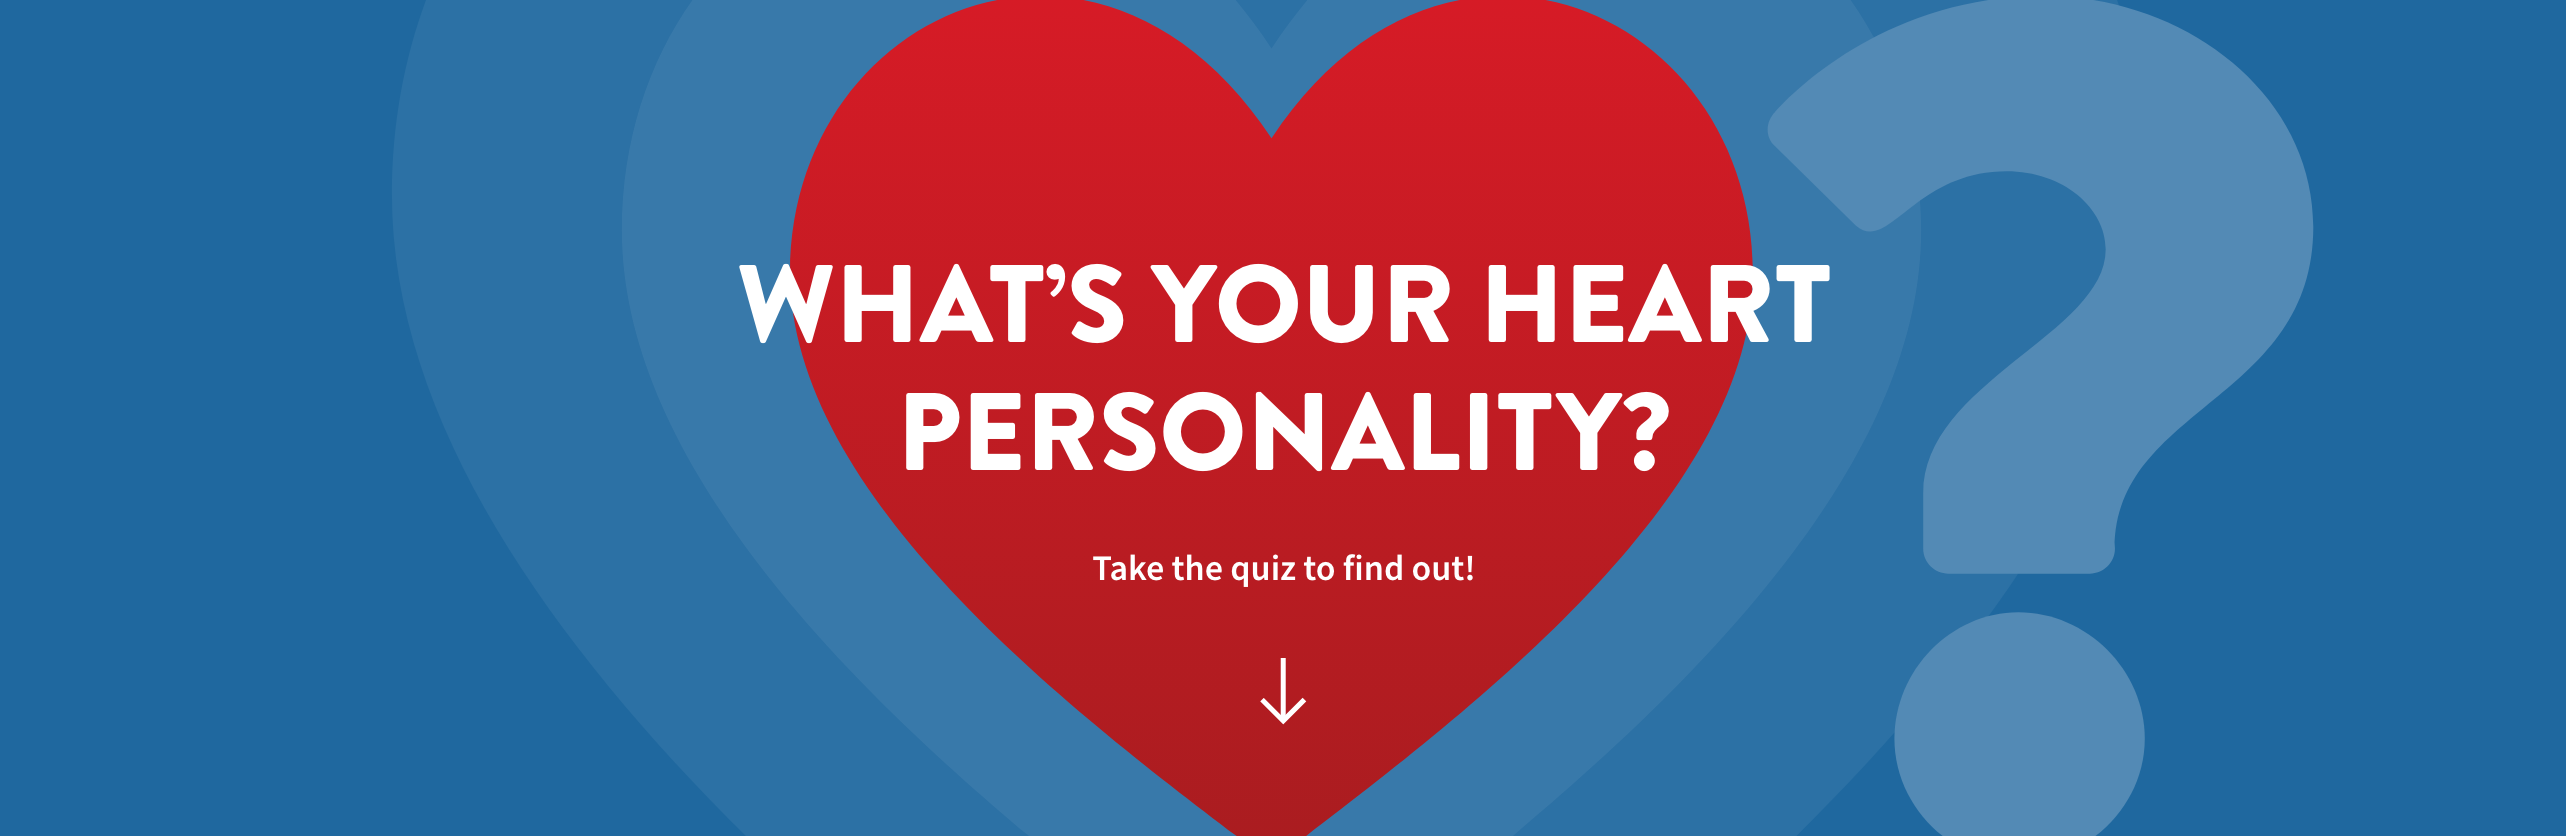 What's your heart personality banner